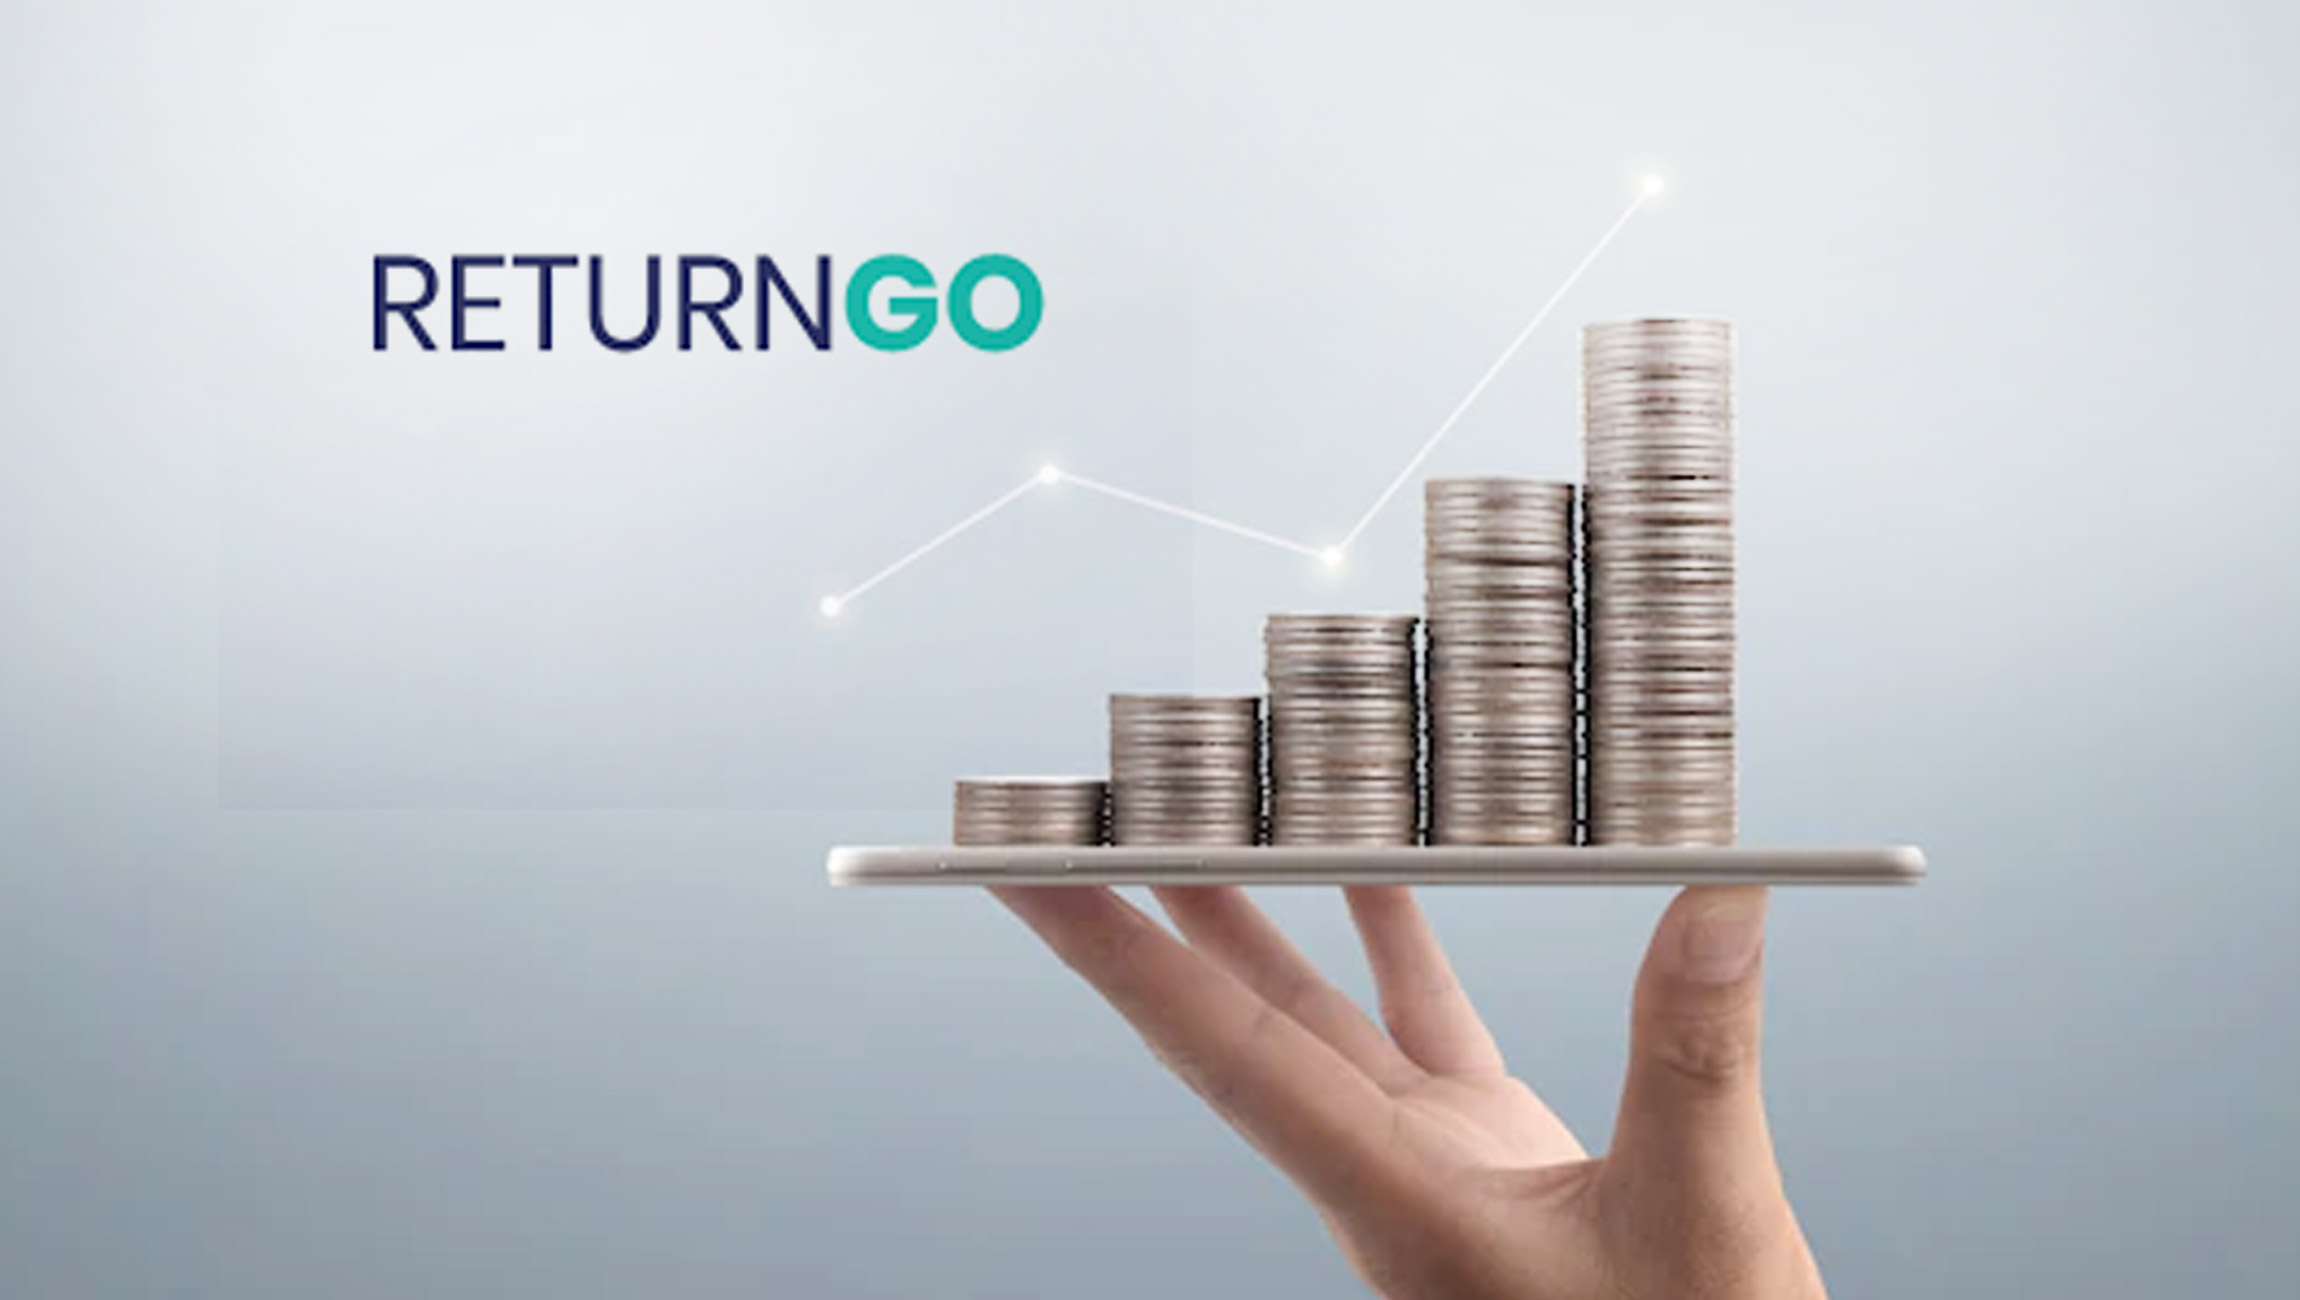 ReturnGO Completed a $6.5 Million Seed Fundraising Round to Improve the Efficiency Of eCommerce Returns